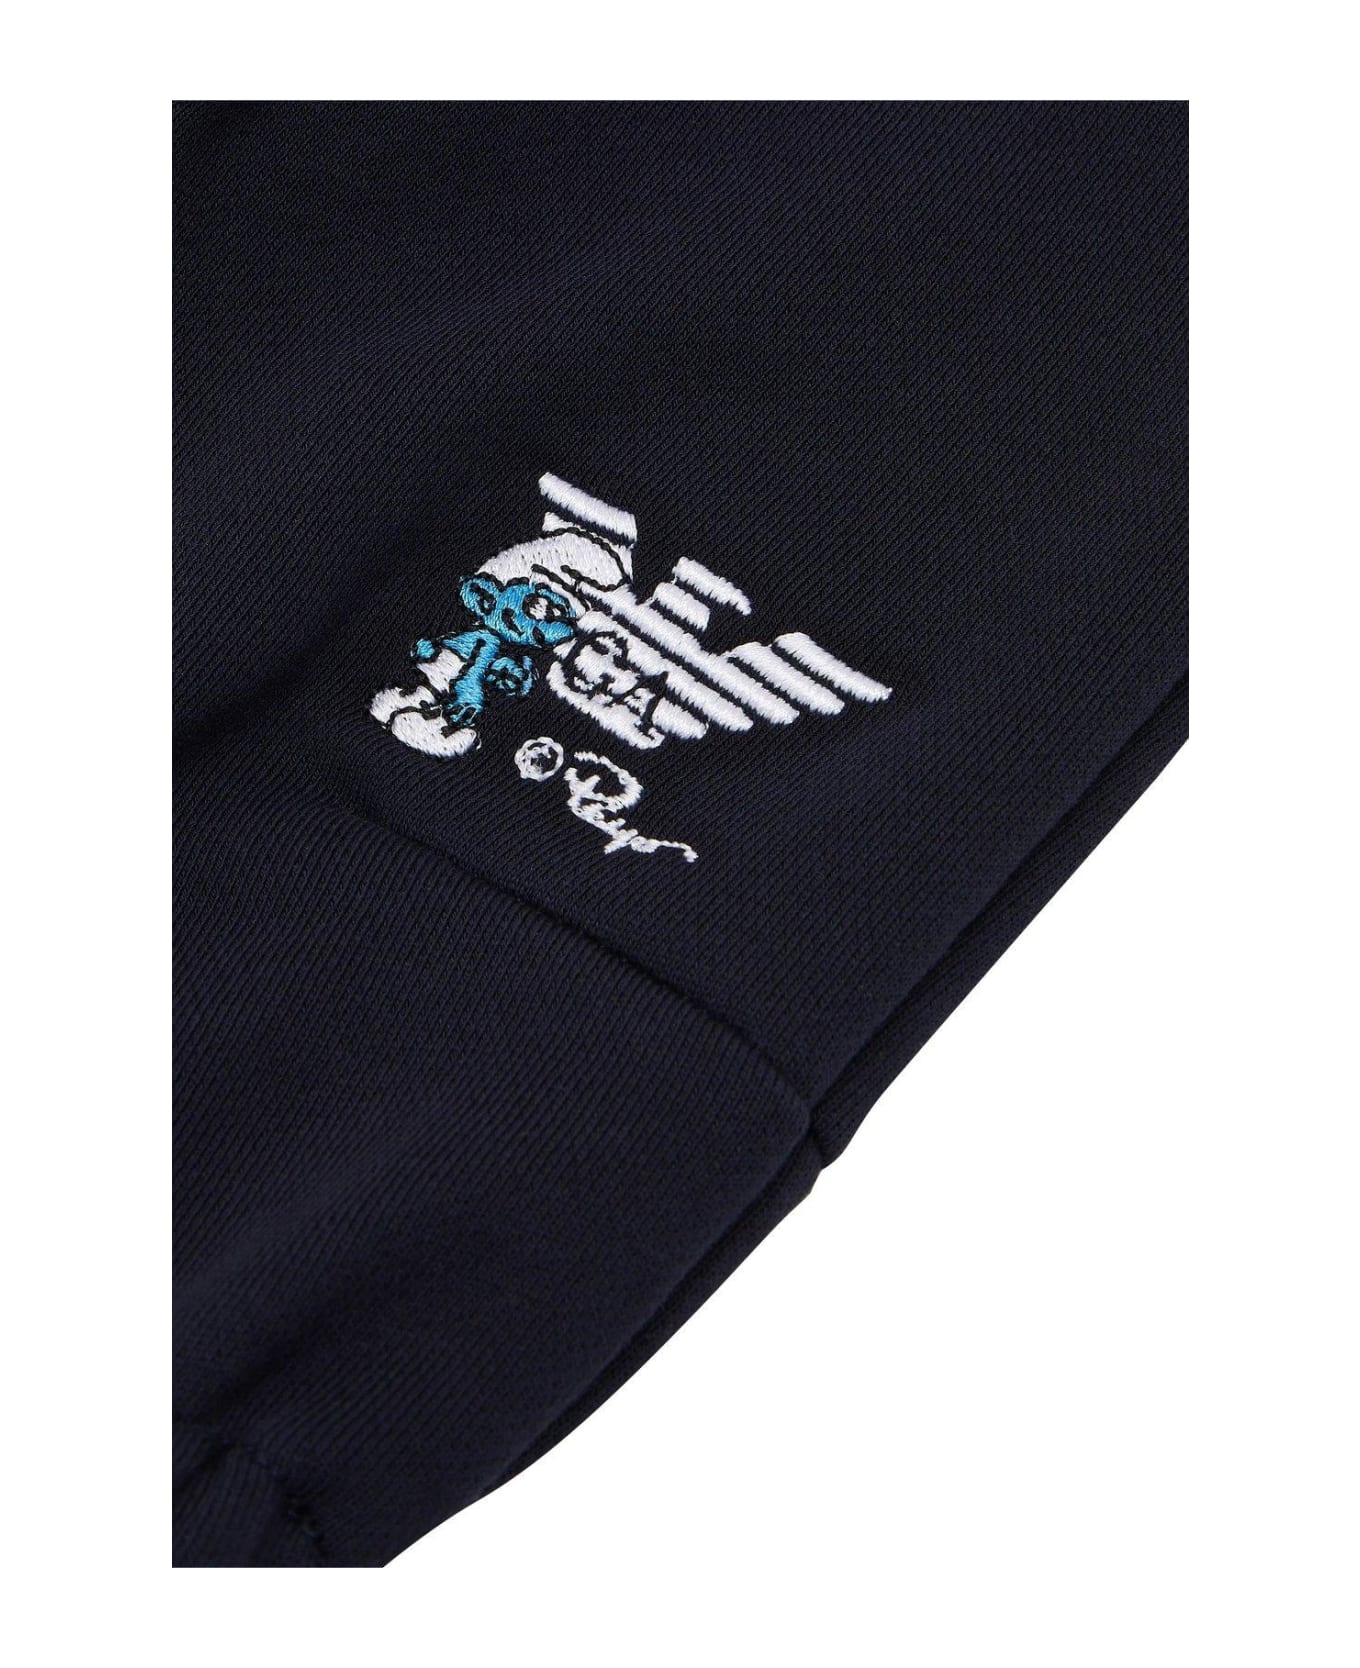 Emporio Armani Smurfs-embroidered Elasticated Waistband Track Pants - Blu navy ボトムス